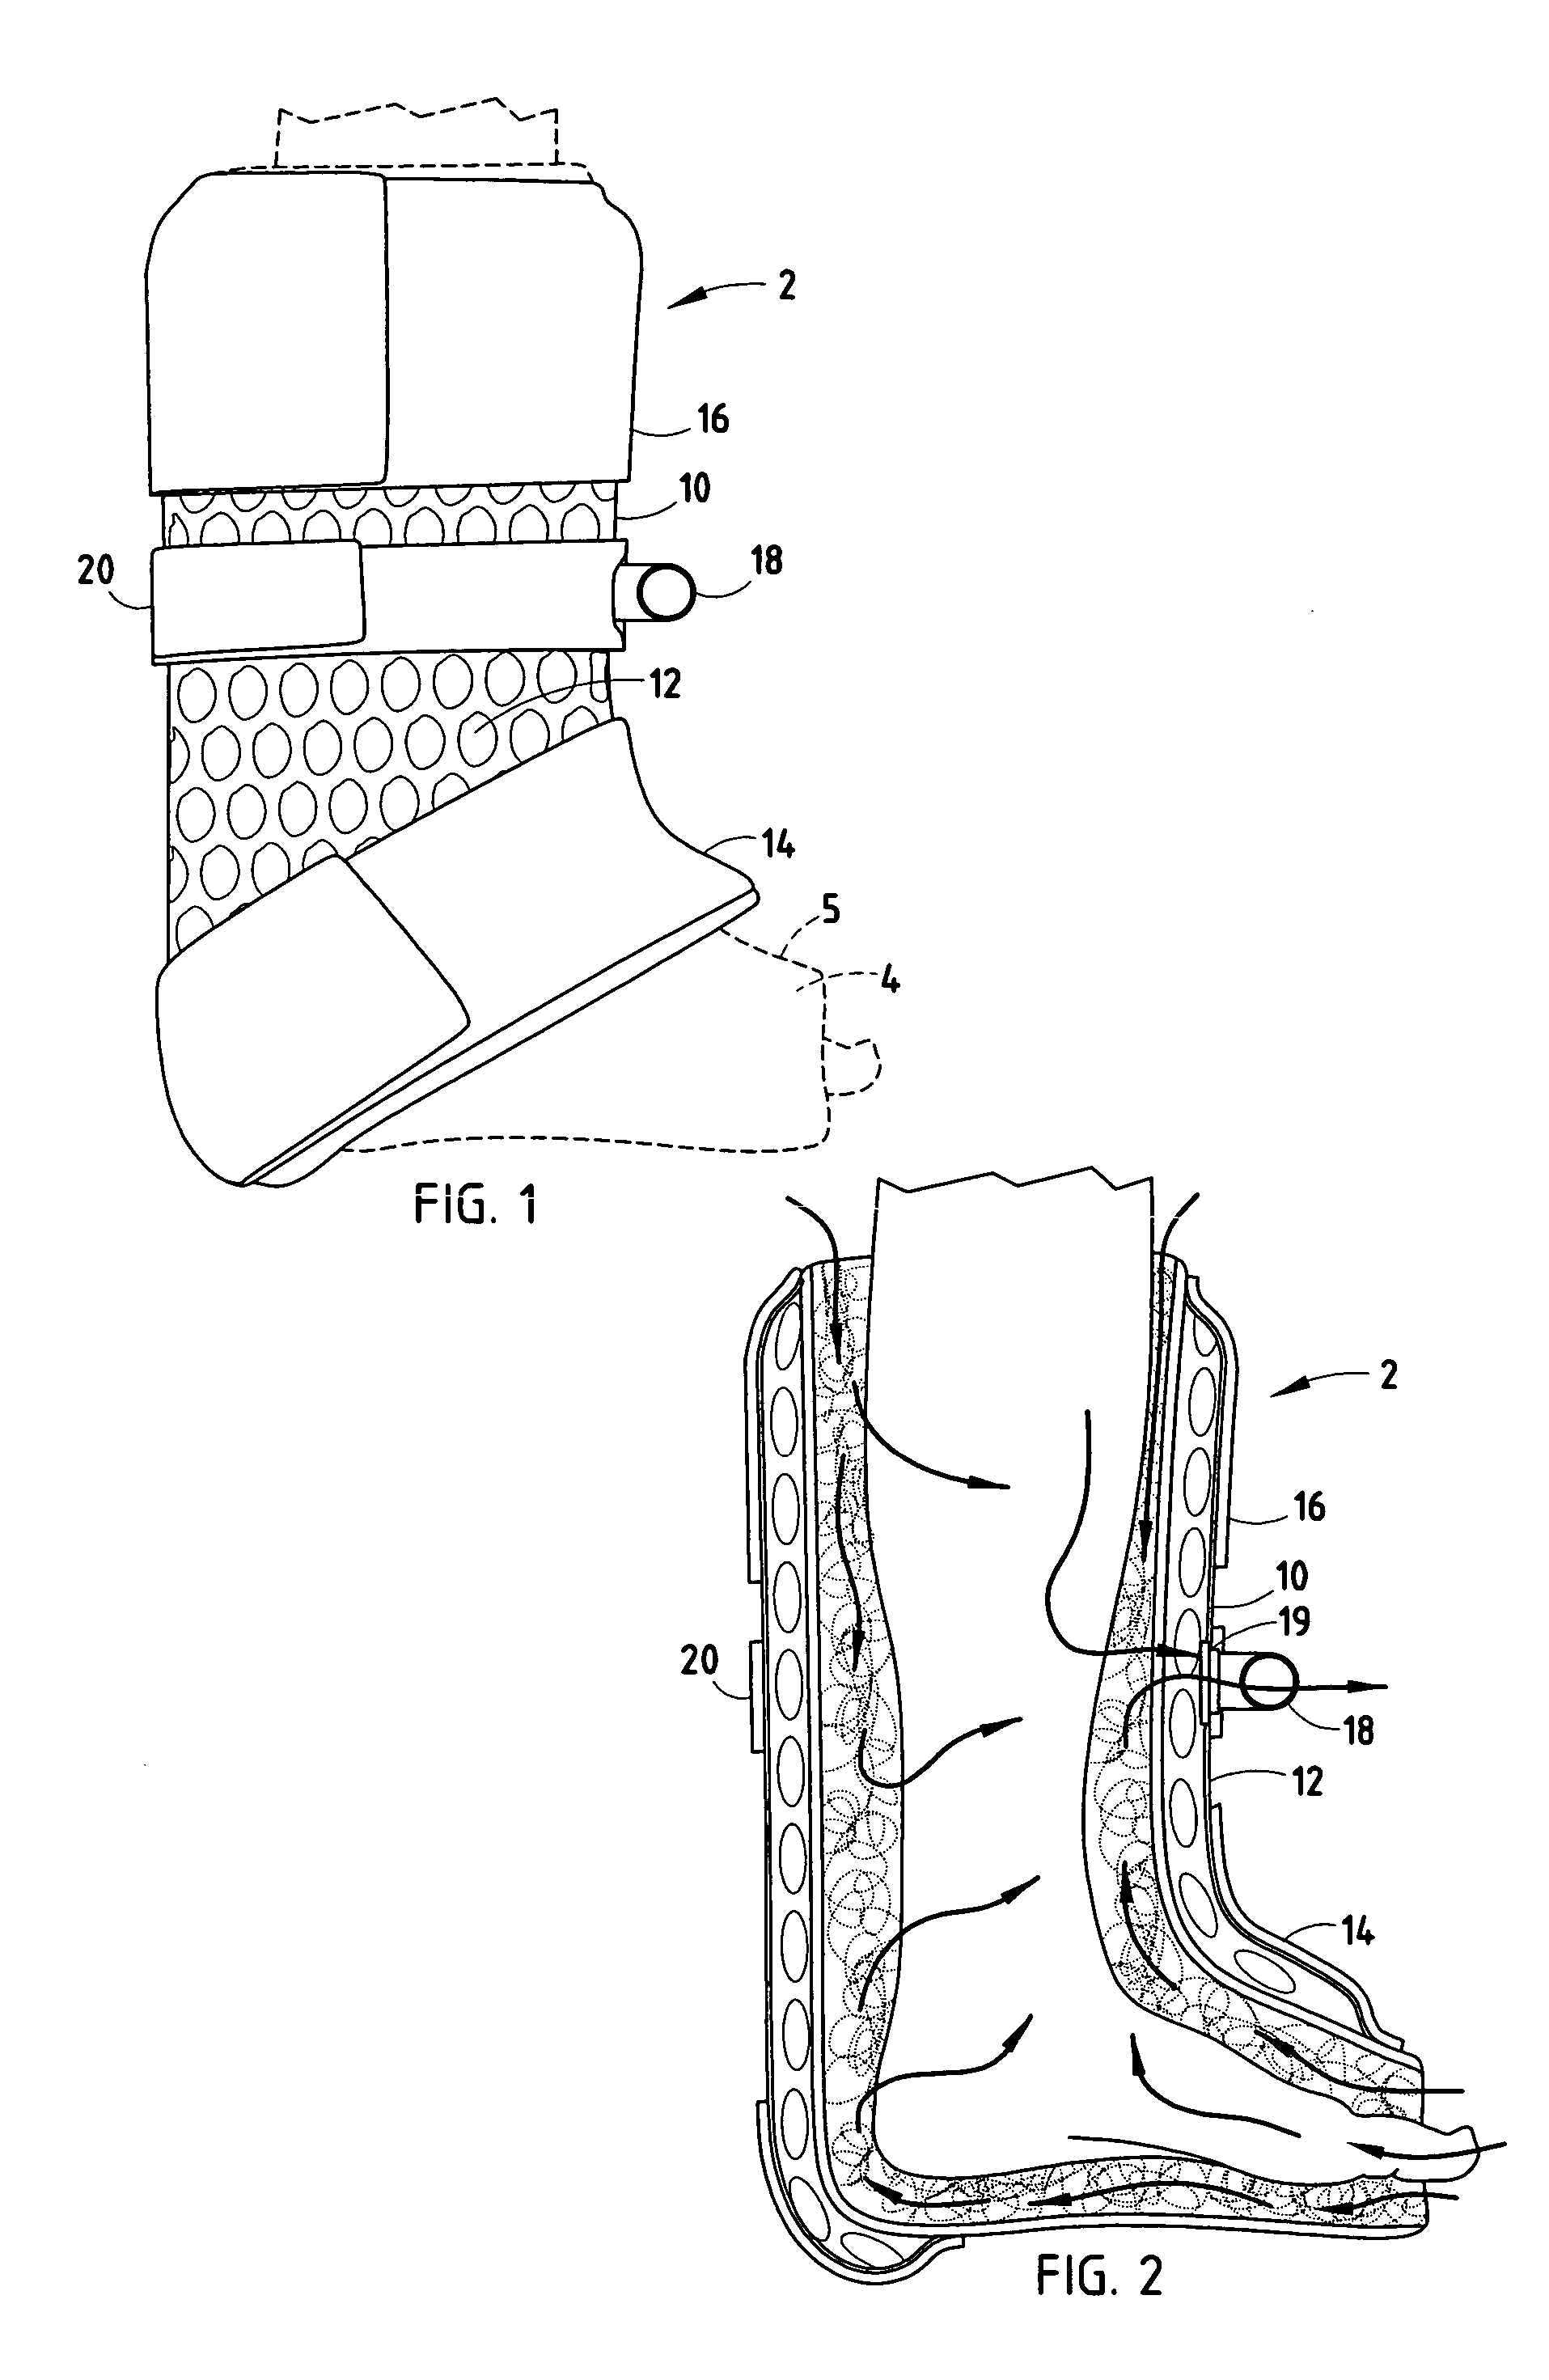 Method and apparatus for aerating a cast